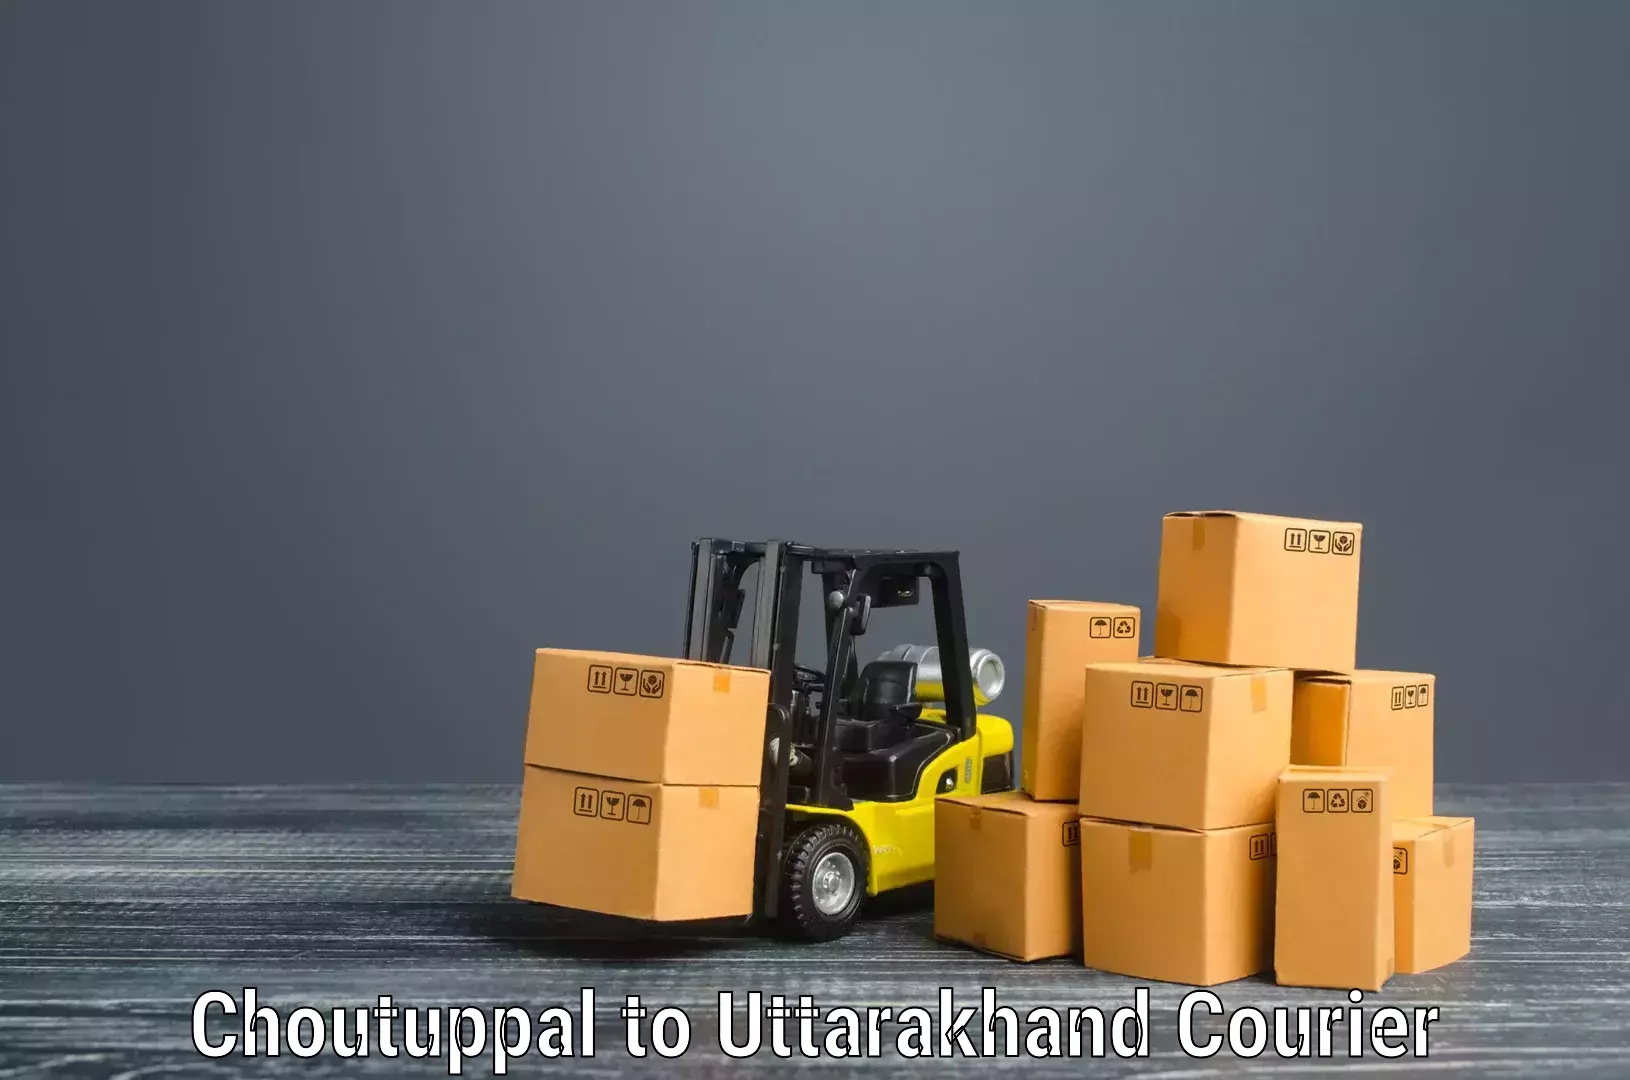 Furniture transport solutions Choutuppal to Pithoragarh